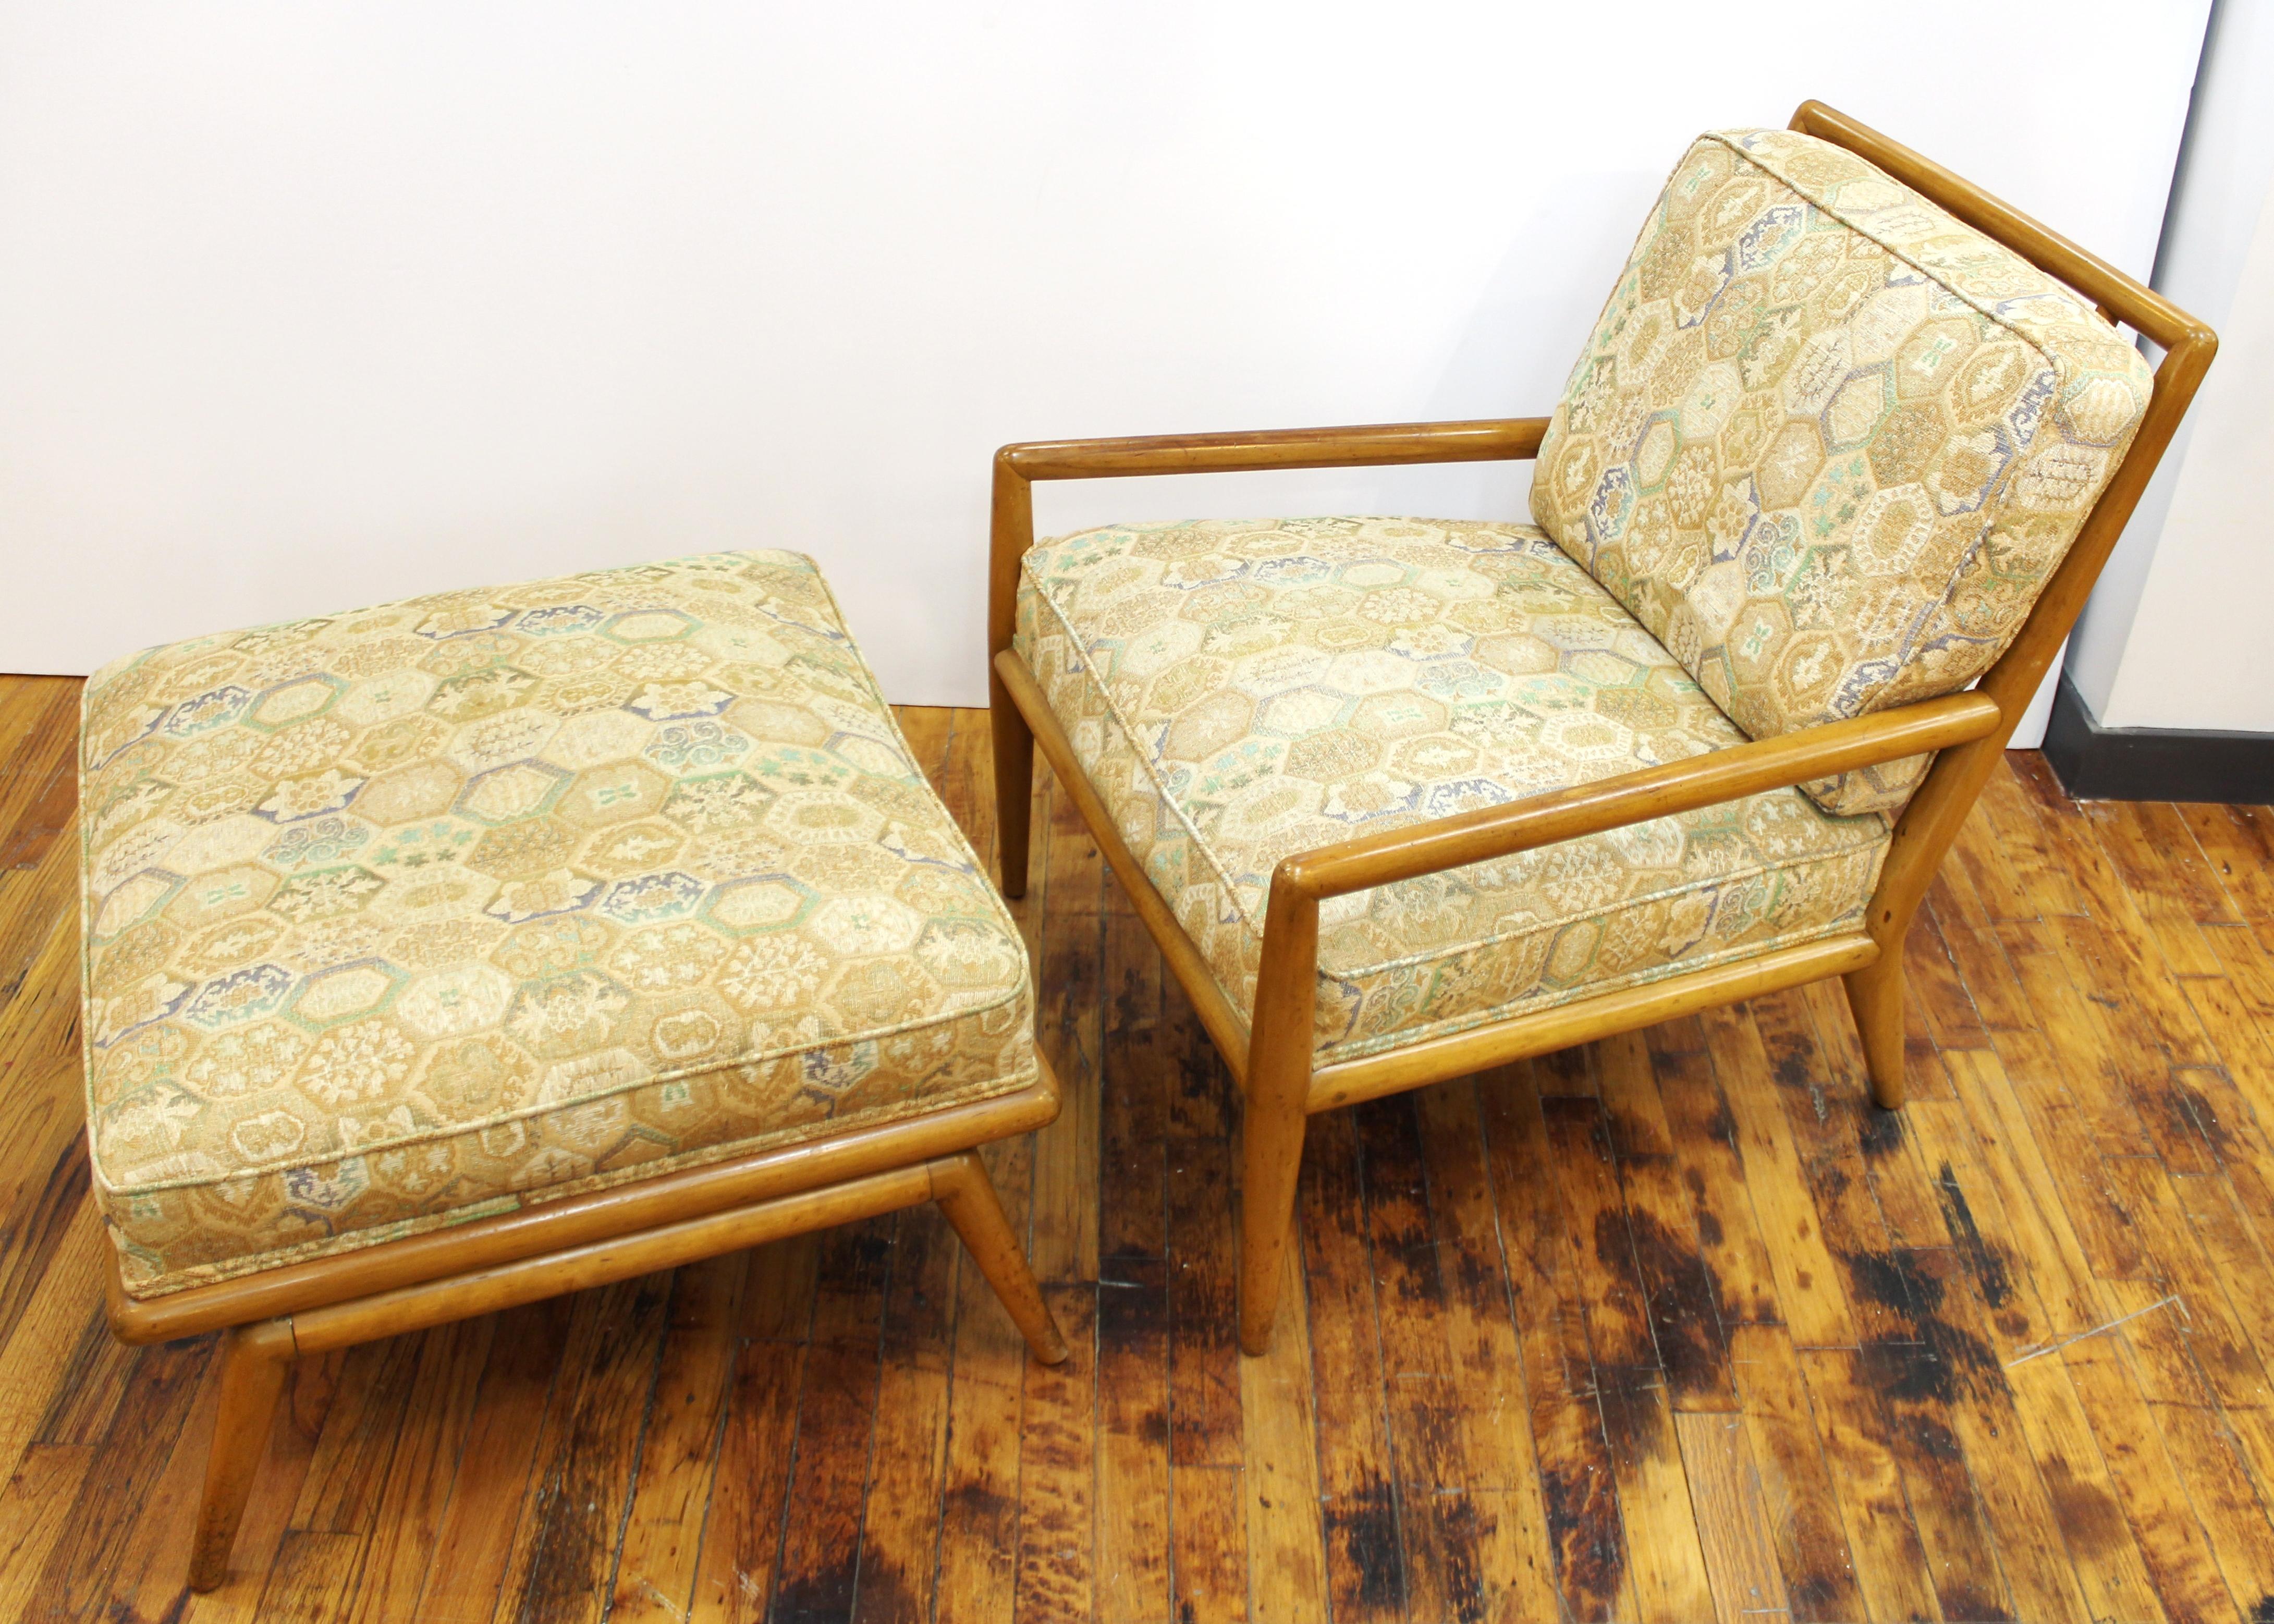 T.H. Robsjohn-Gibbings for Widdicomb Mid-Century Modern wood lounge chair and ottoman set in matching textile upholstery, made in circa 1955. In great vintage condition with age-appropriate wear and use.